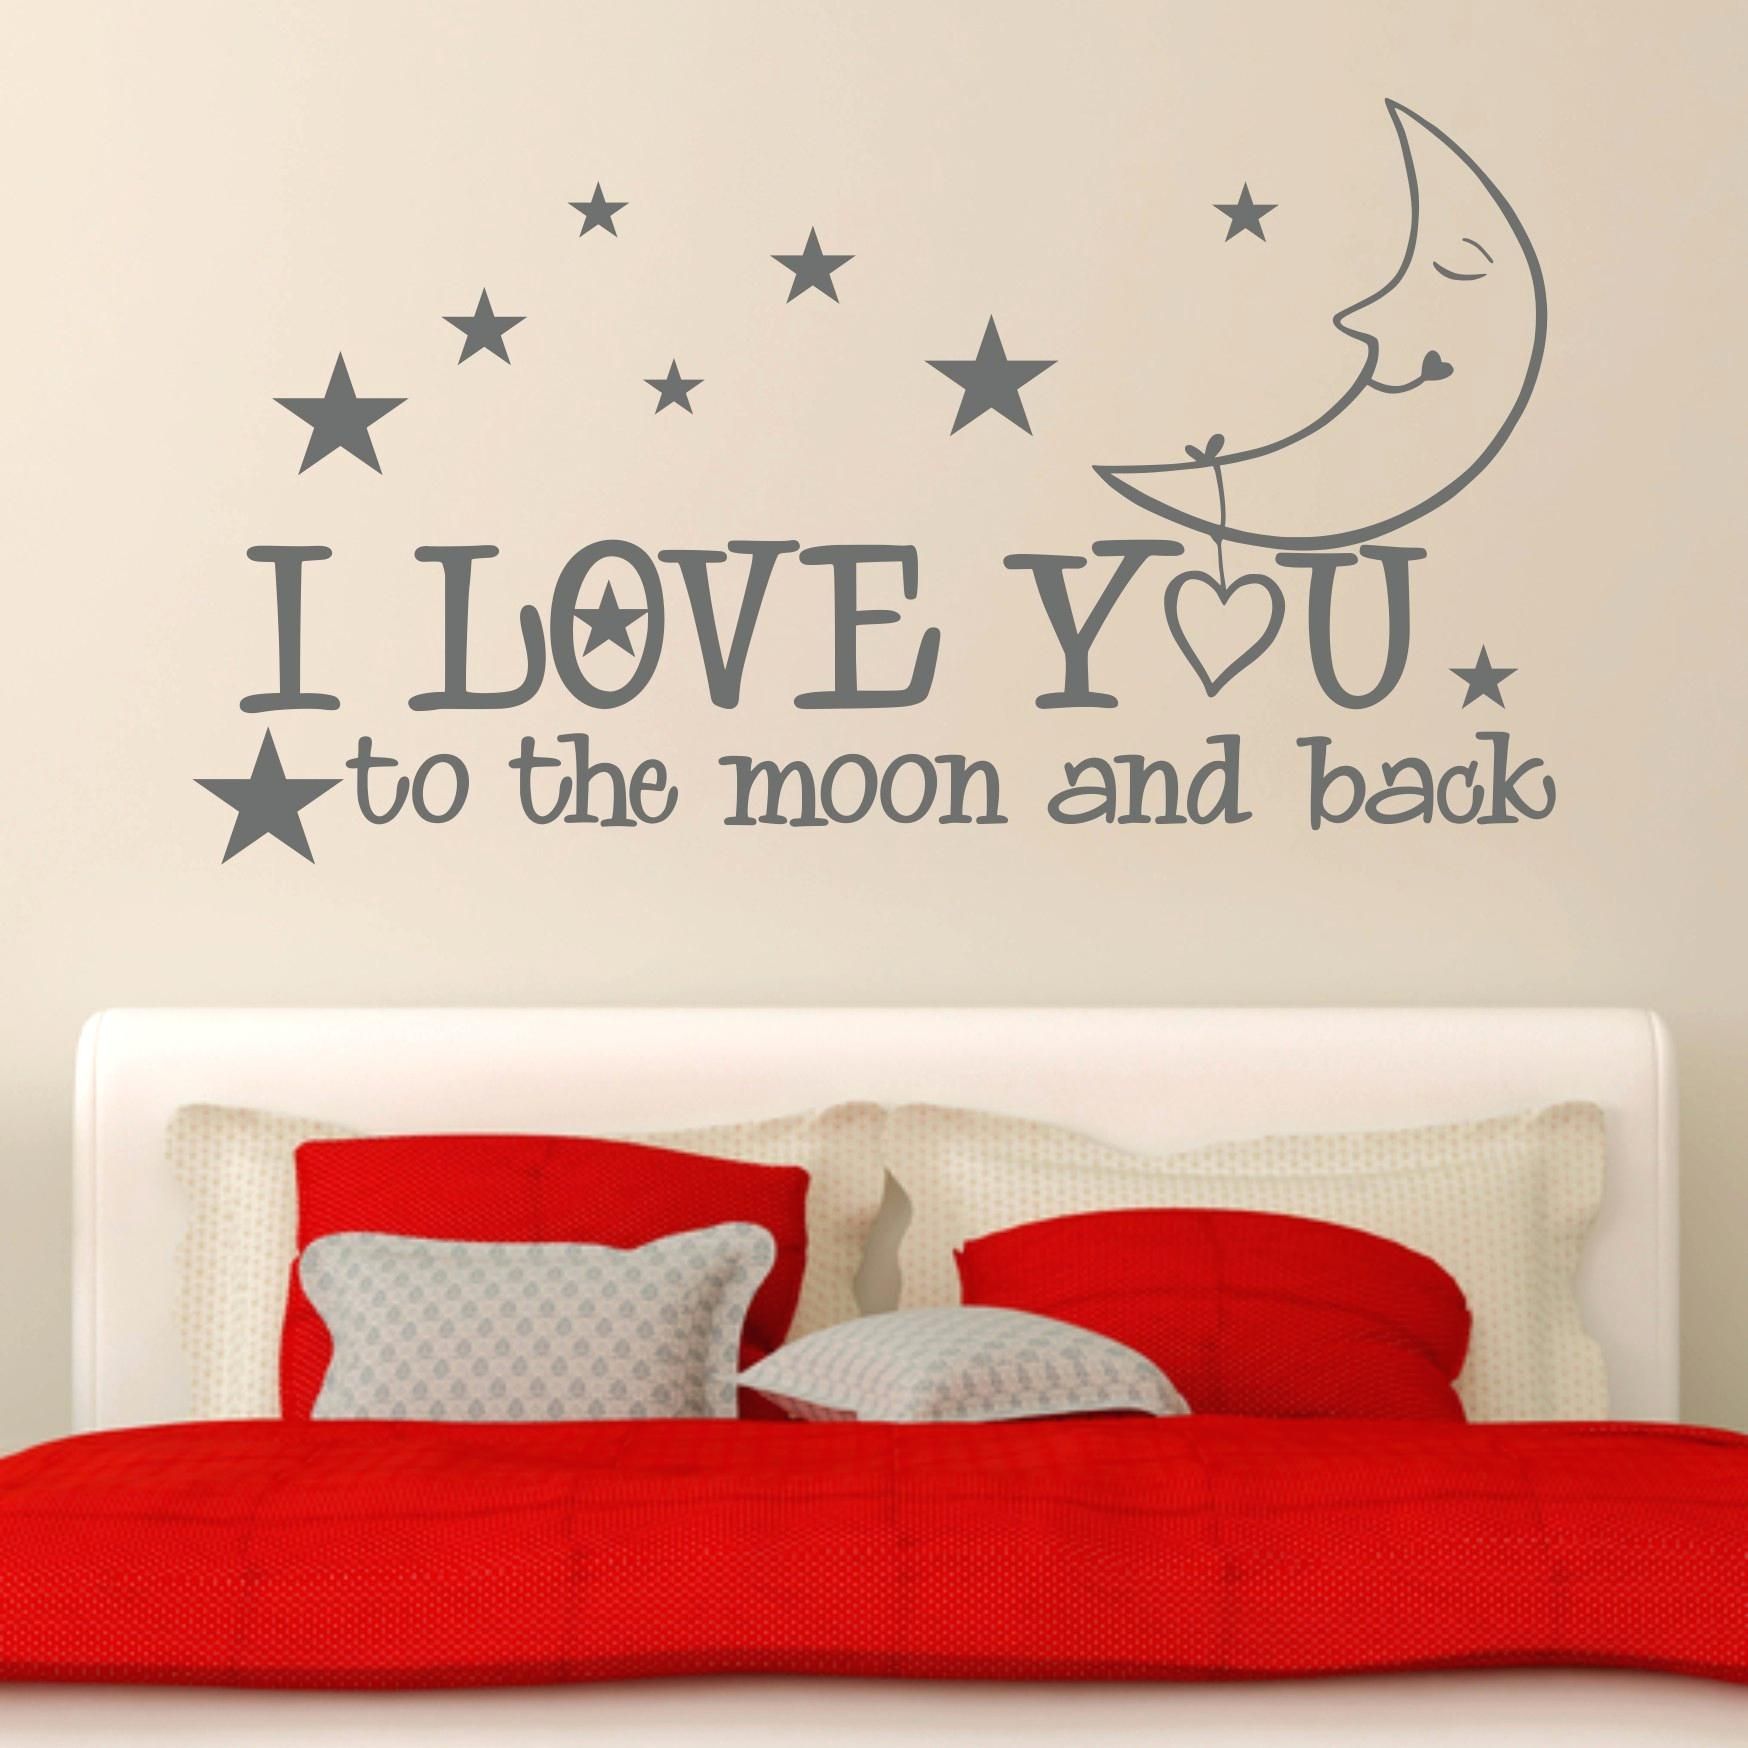 To The Moon And Back Wall Decal I Love You To The Moon And Back Big With Regard To Best And Newest I Love You To The Moon And Back Wall Art (View 20 of 20)